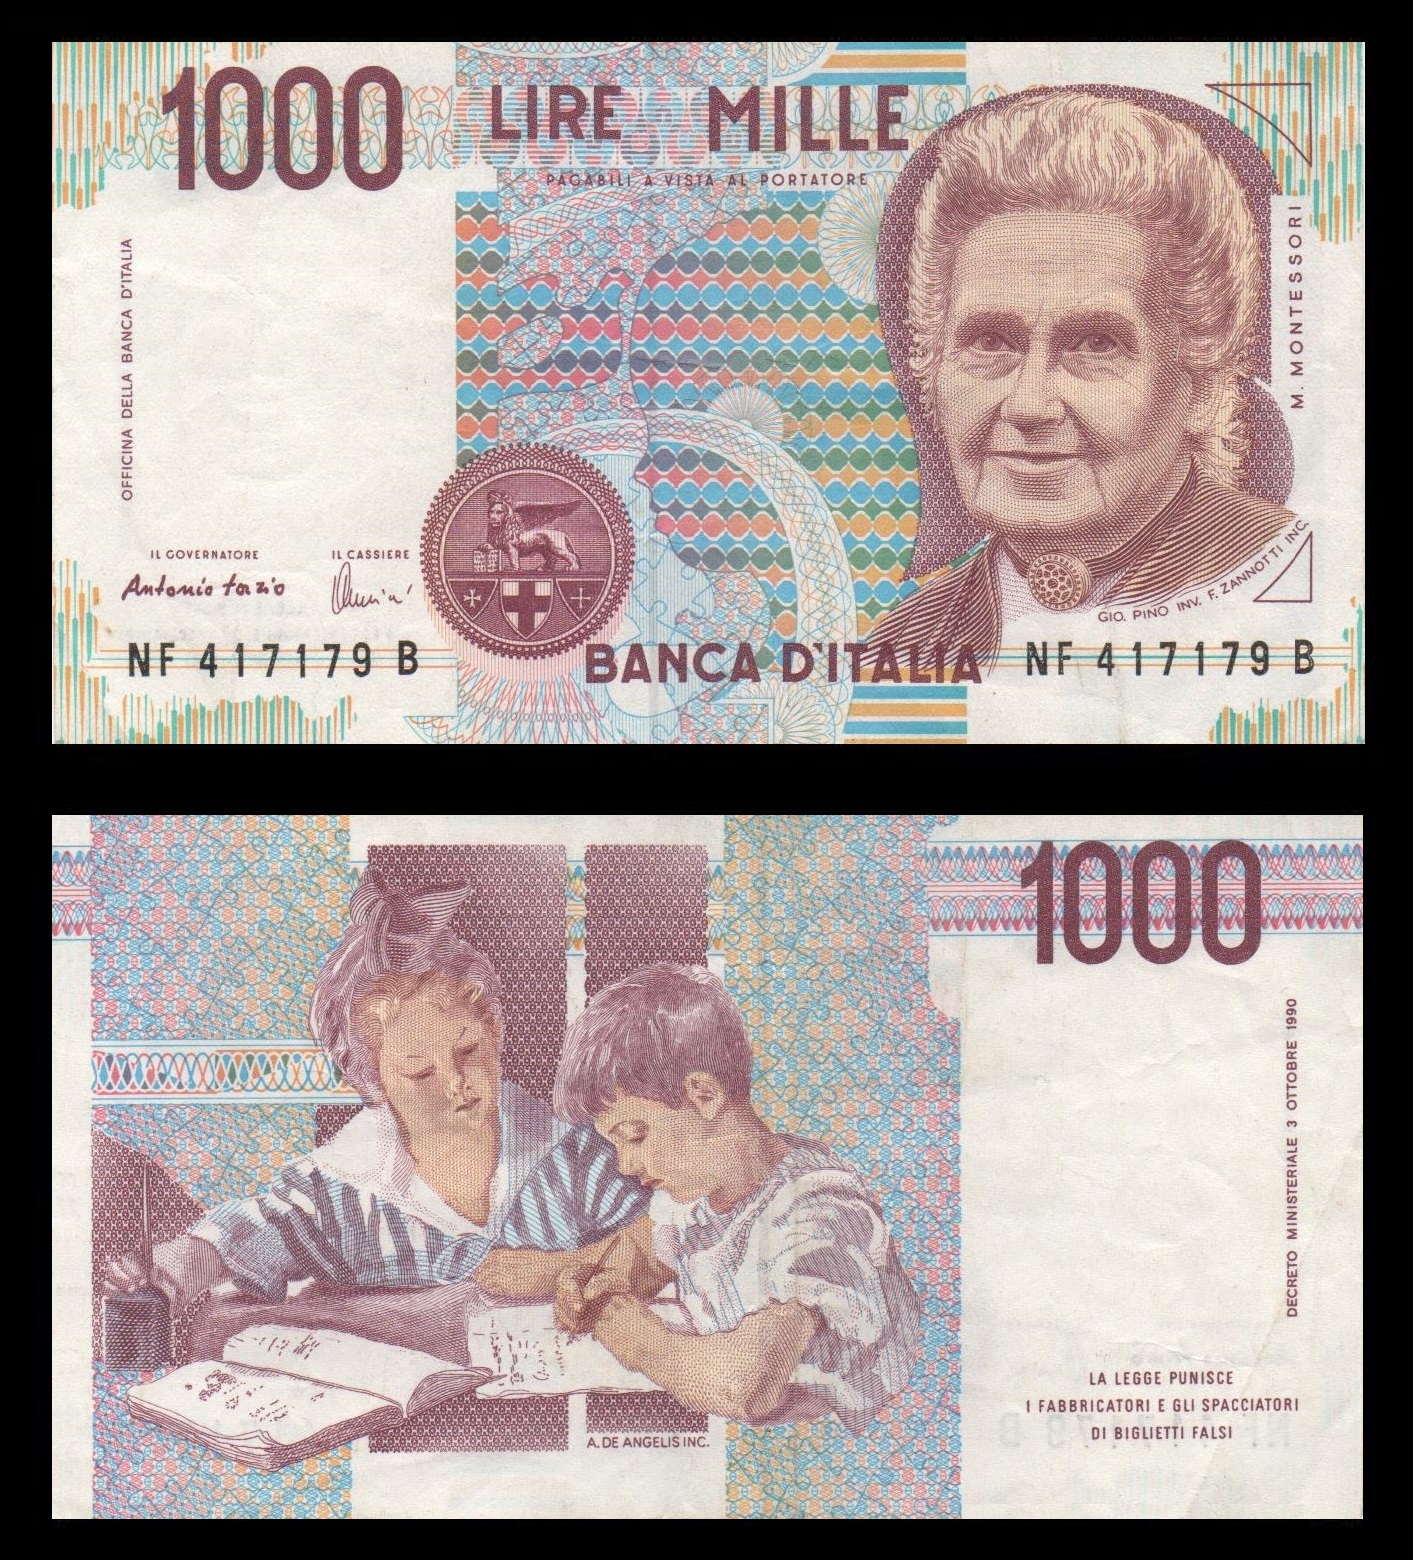 OUT OF PRINT 28 YEARS BEAUTIFUL NOTE 1000 LIRE Germ Crisp Uncirculated 1990 IT GEM UNCIRC ITALY 1000 LIRE BILL w FOUNDER OF MONTESSORI SCHOOLS